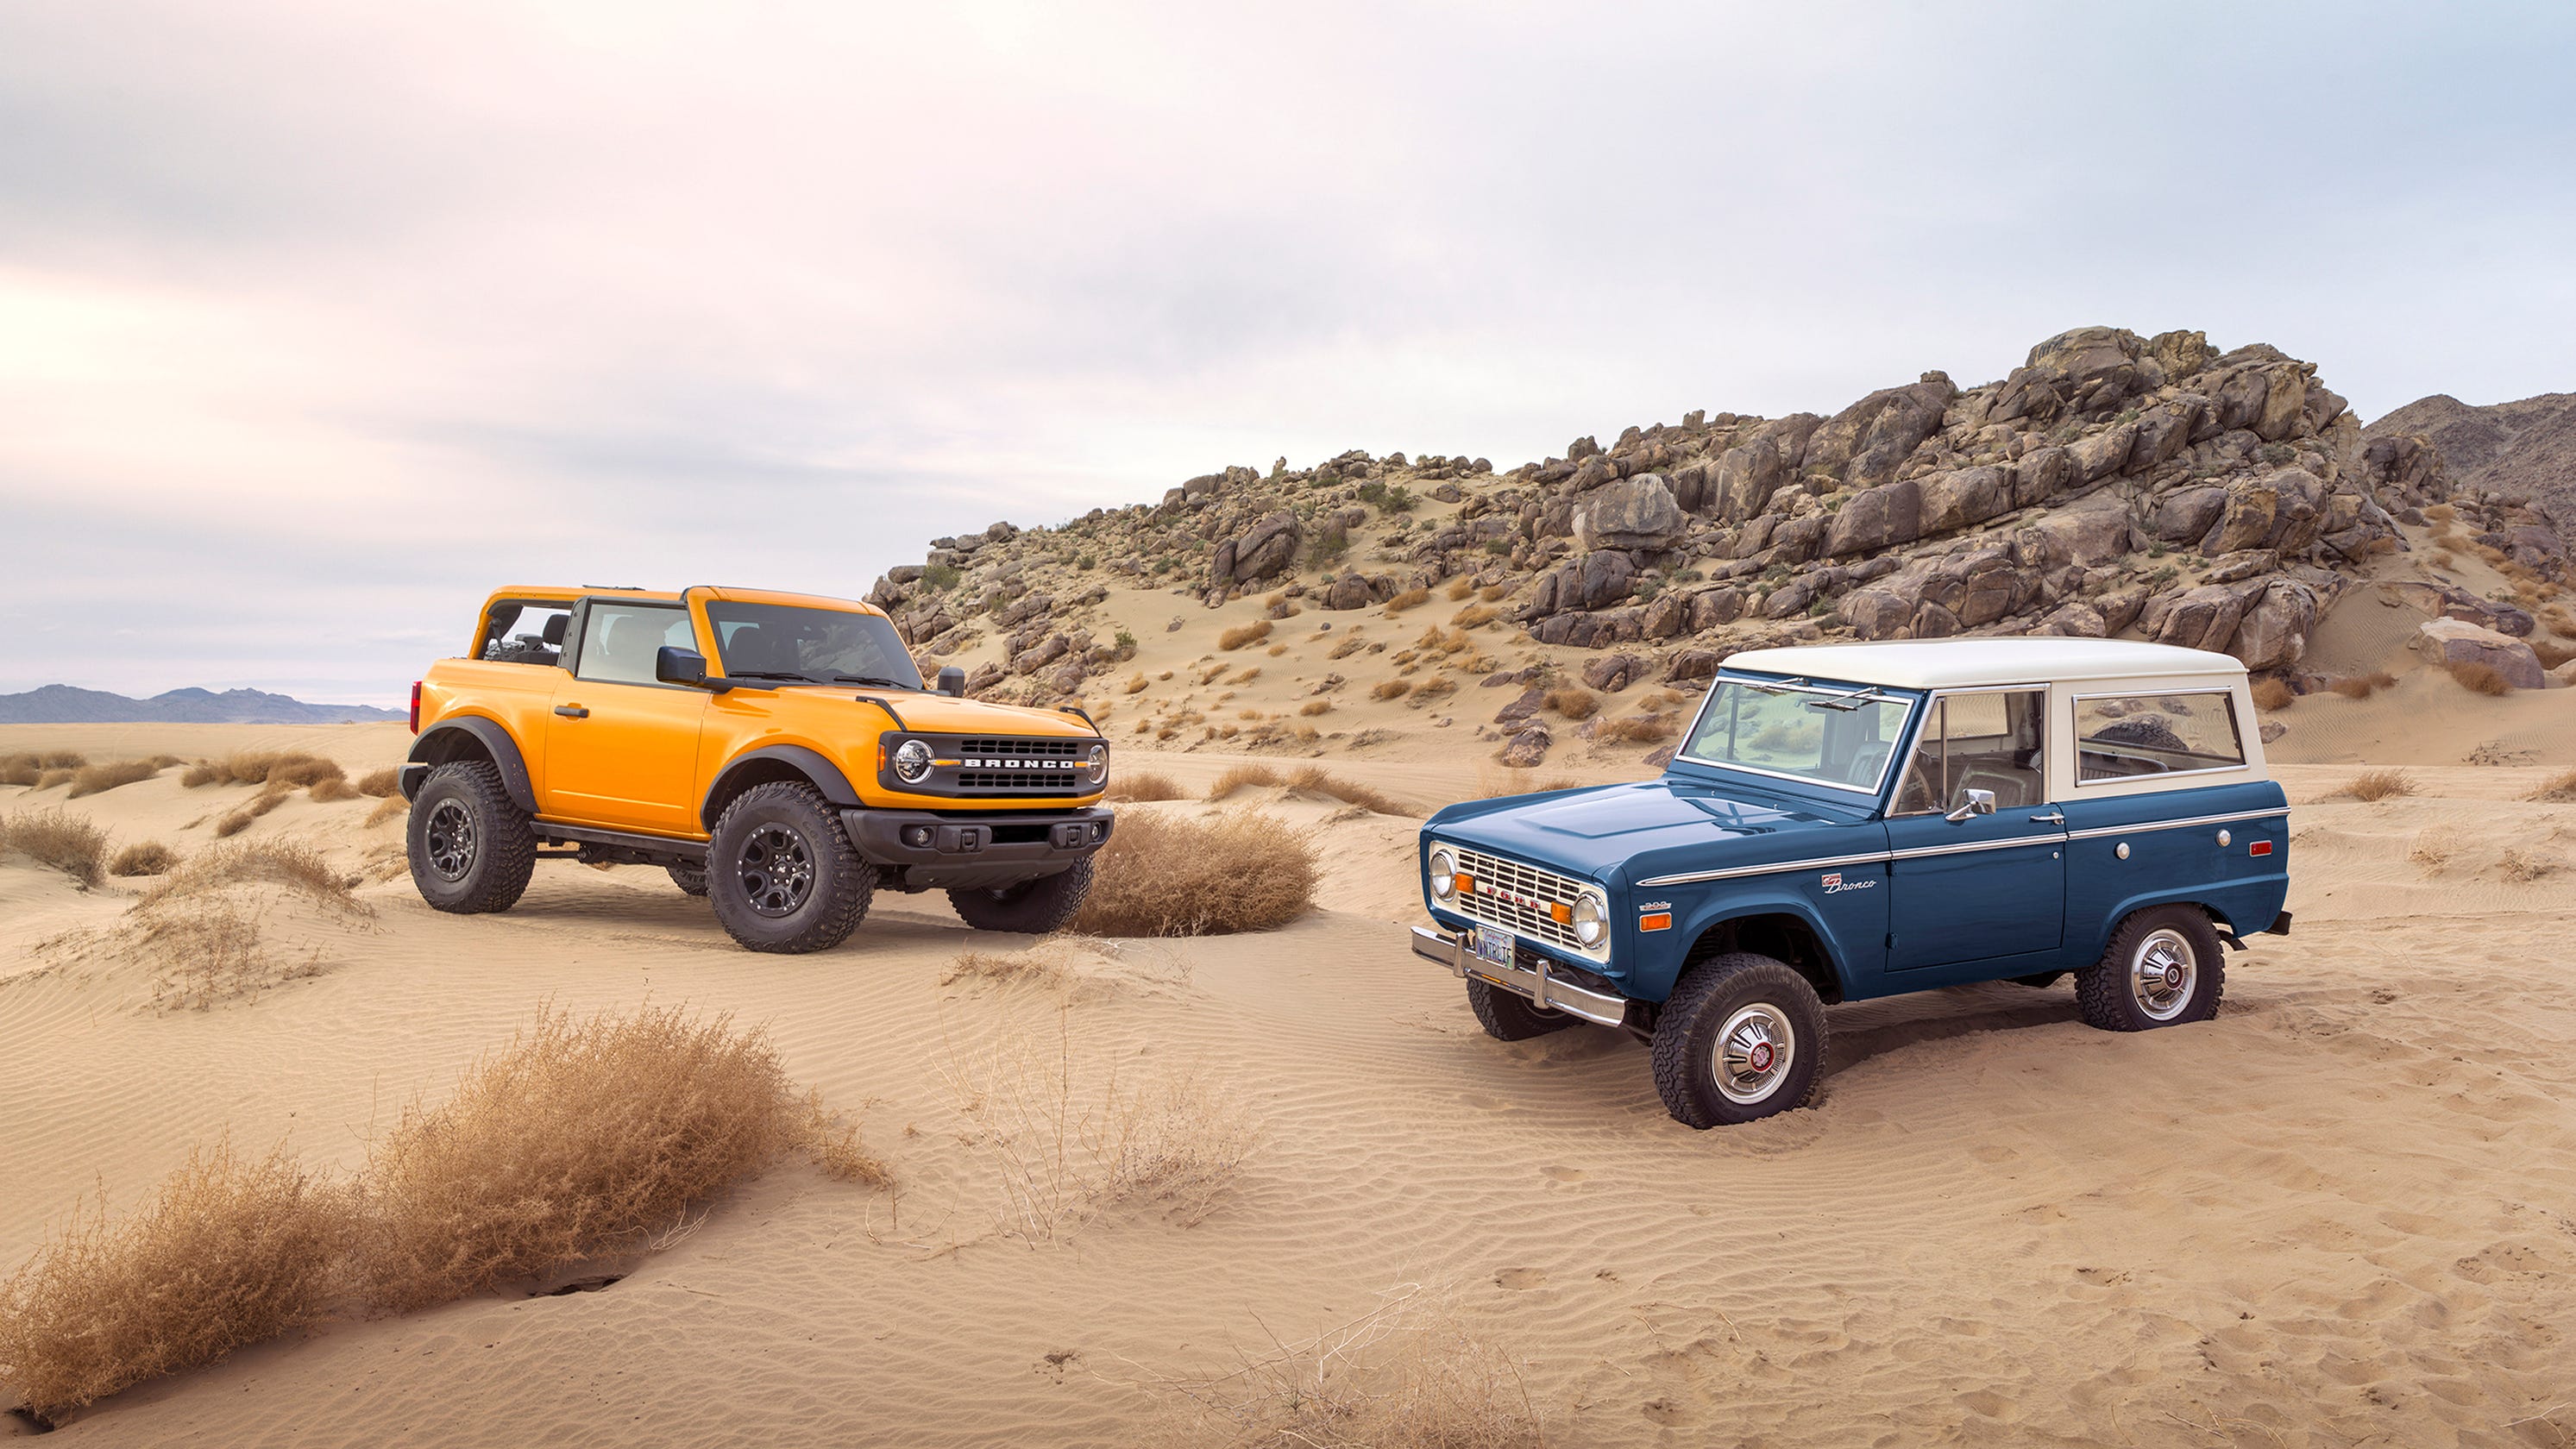 Ford Bronco revealed: What's different about new model